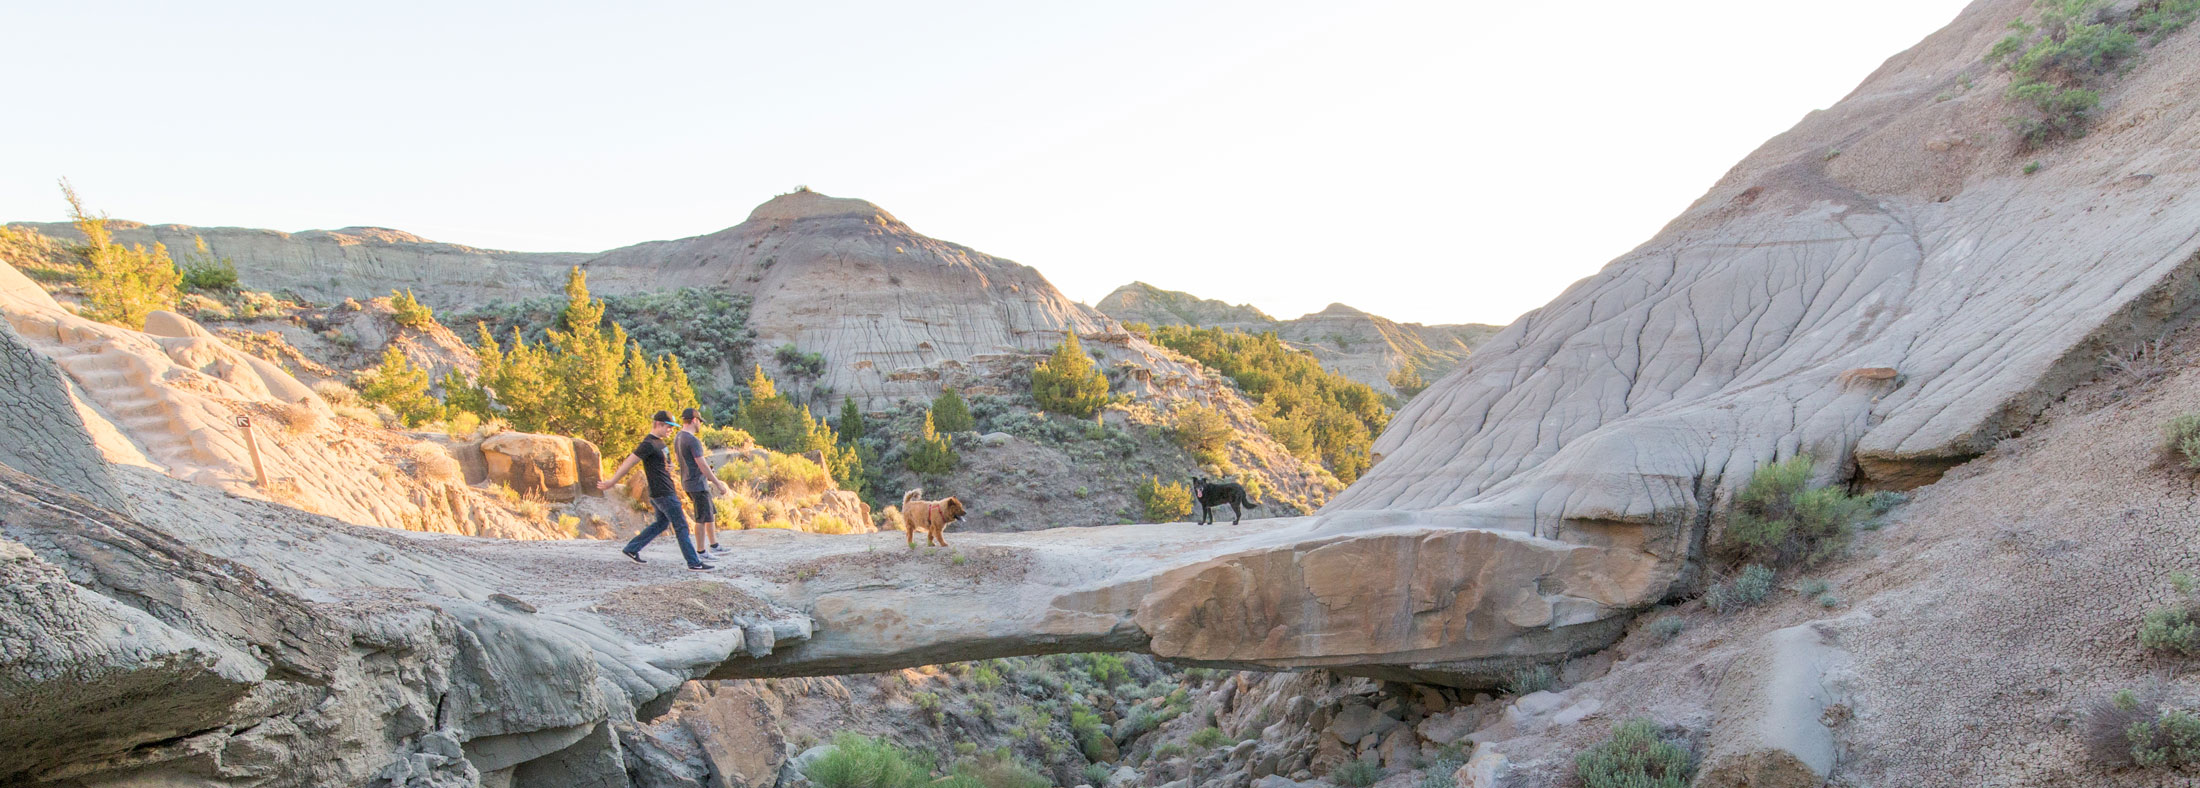 Hiking Across Southeast Montana: Get Out Here and Explore